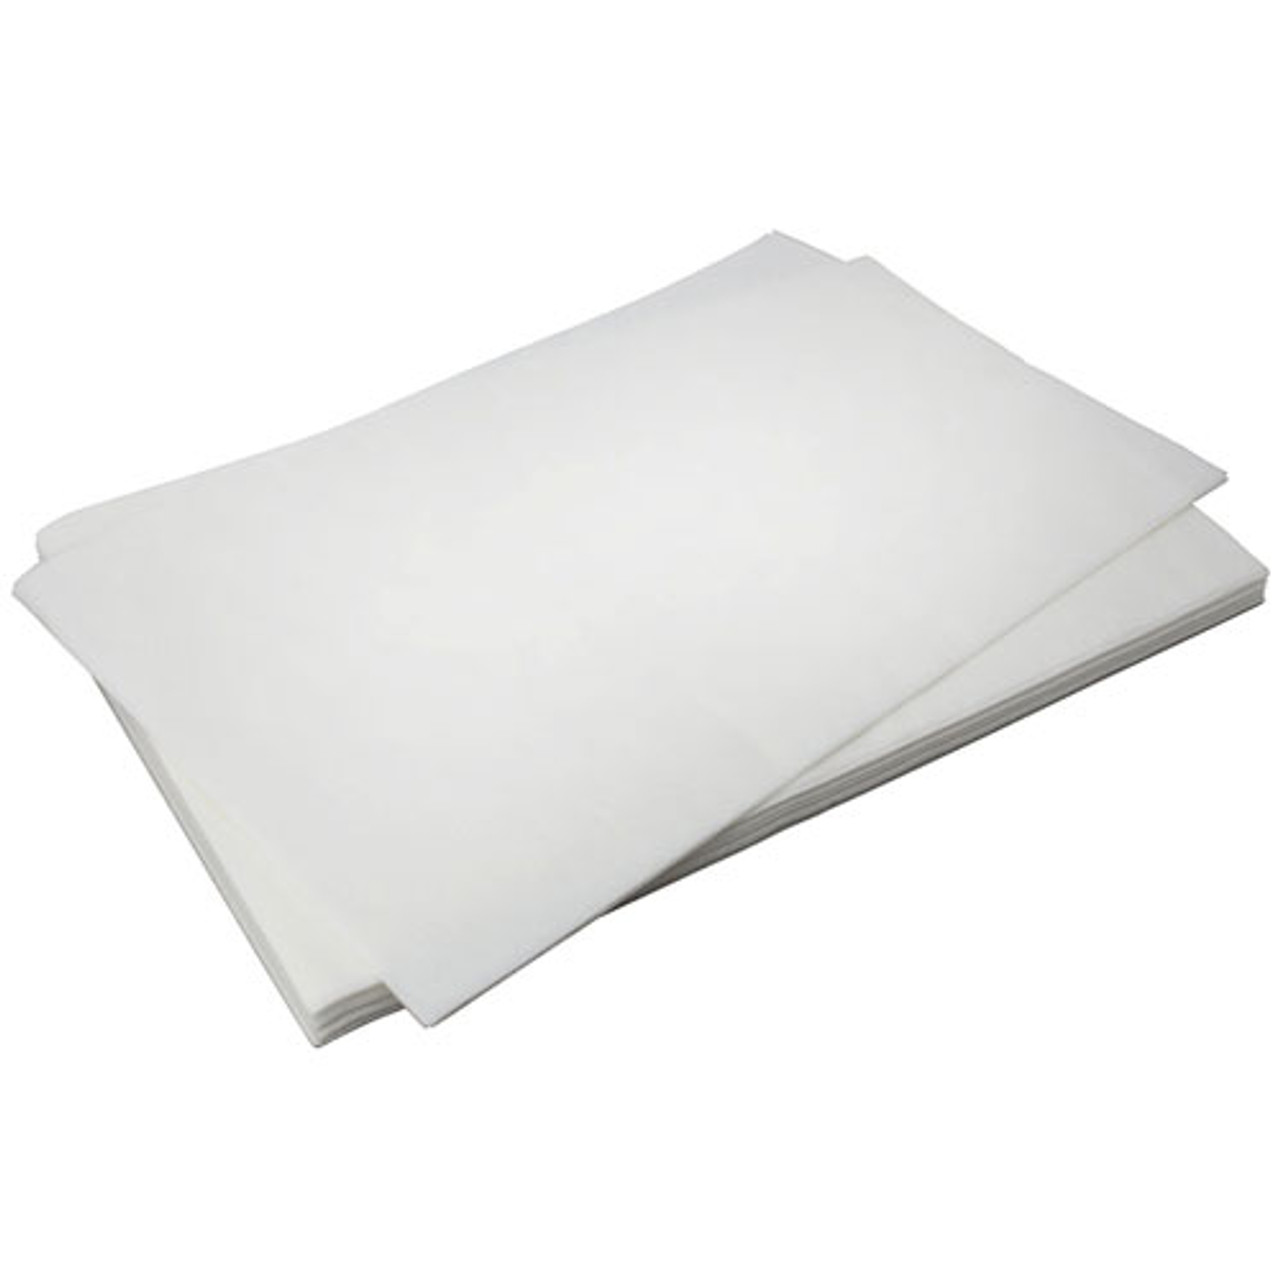 Filter Sheets 100Pk - Replacement Part For Frymaster FM803-0153